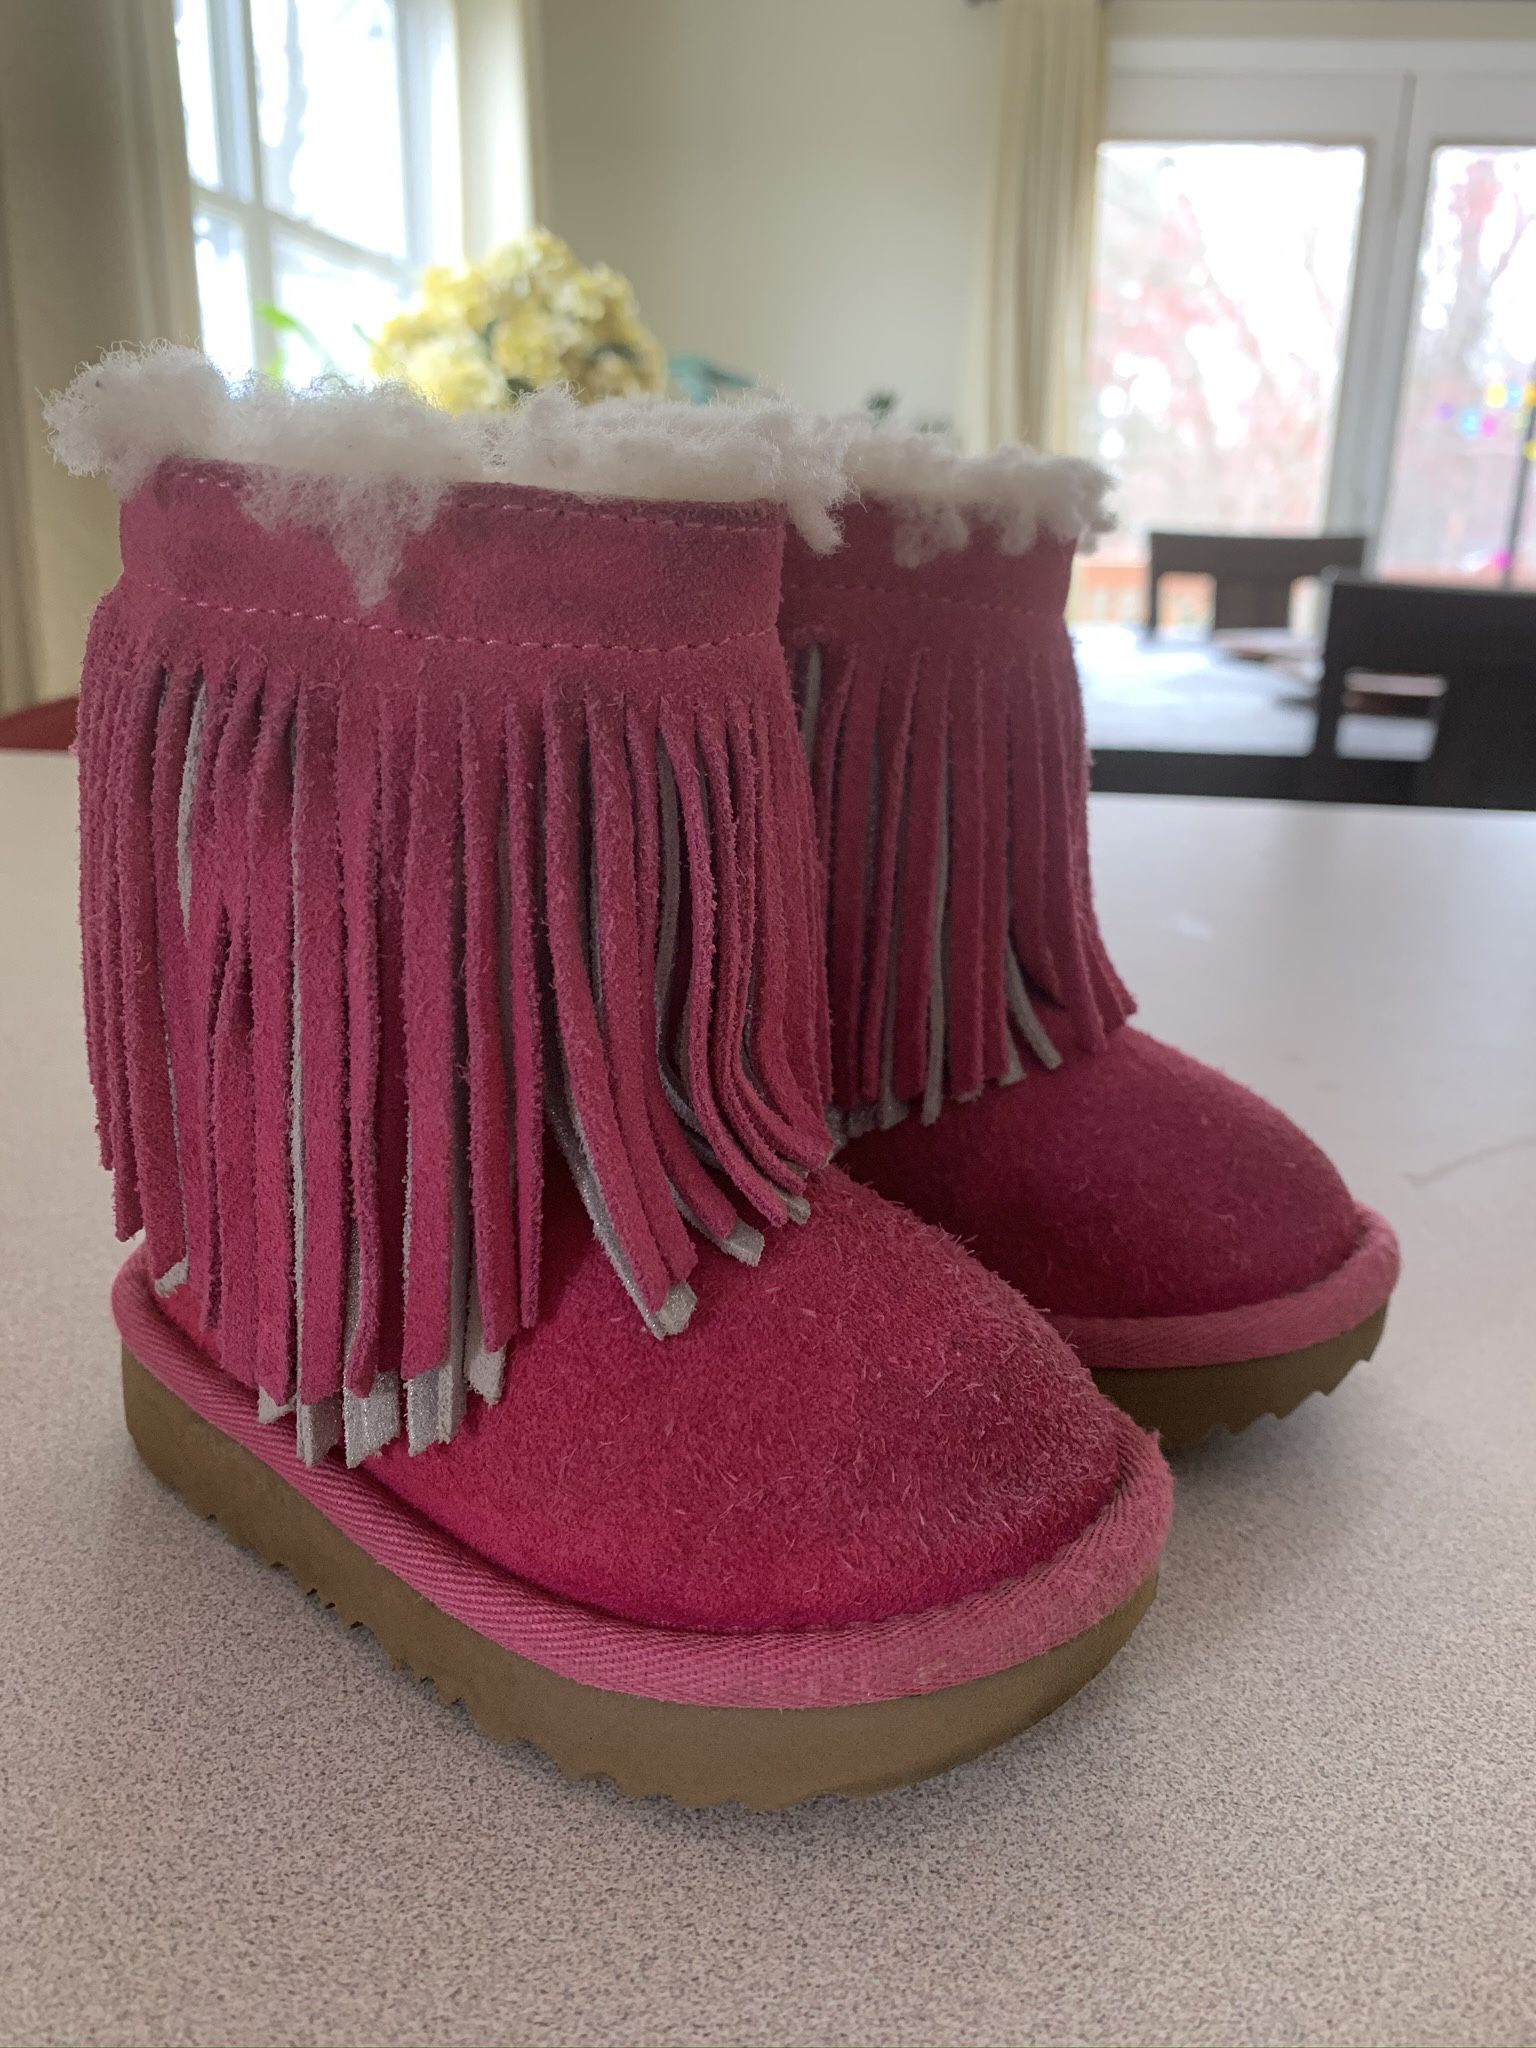 Ugg’s Toddler Boots Size 6 